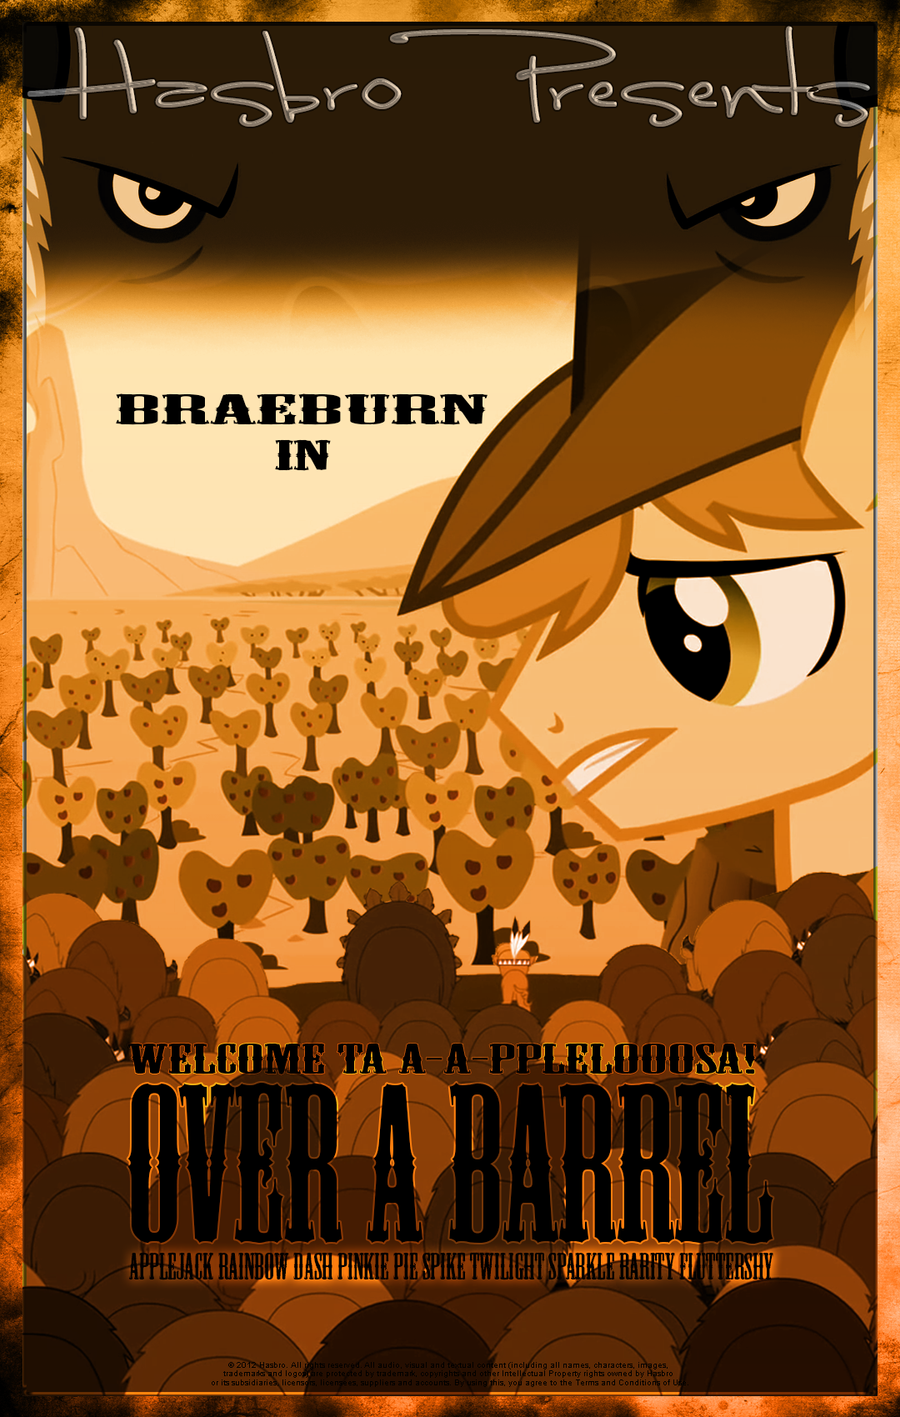 mlp___over_a_barrel___movie_poster_by_pims1978-d55ga6j.png